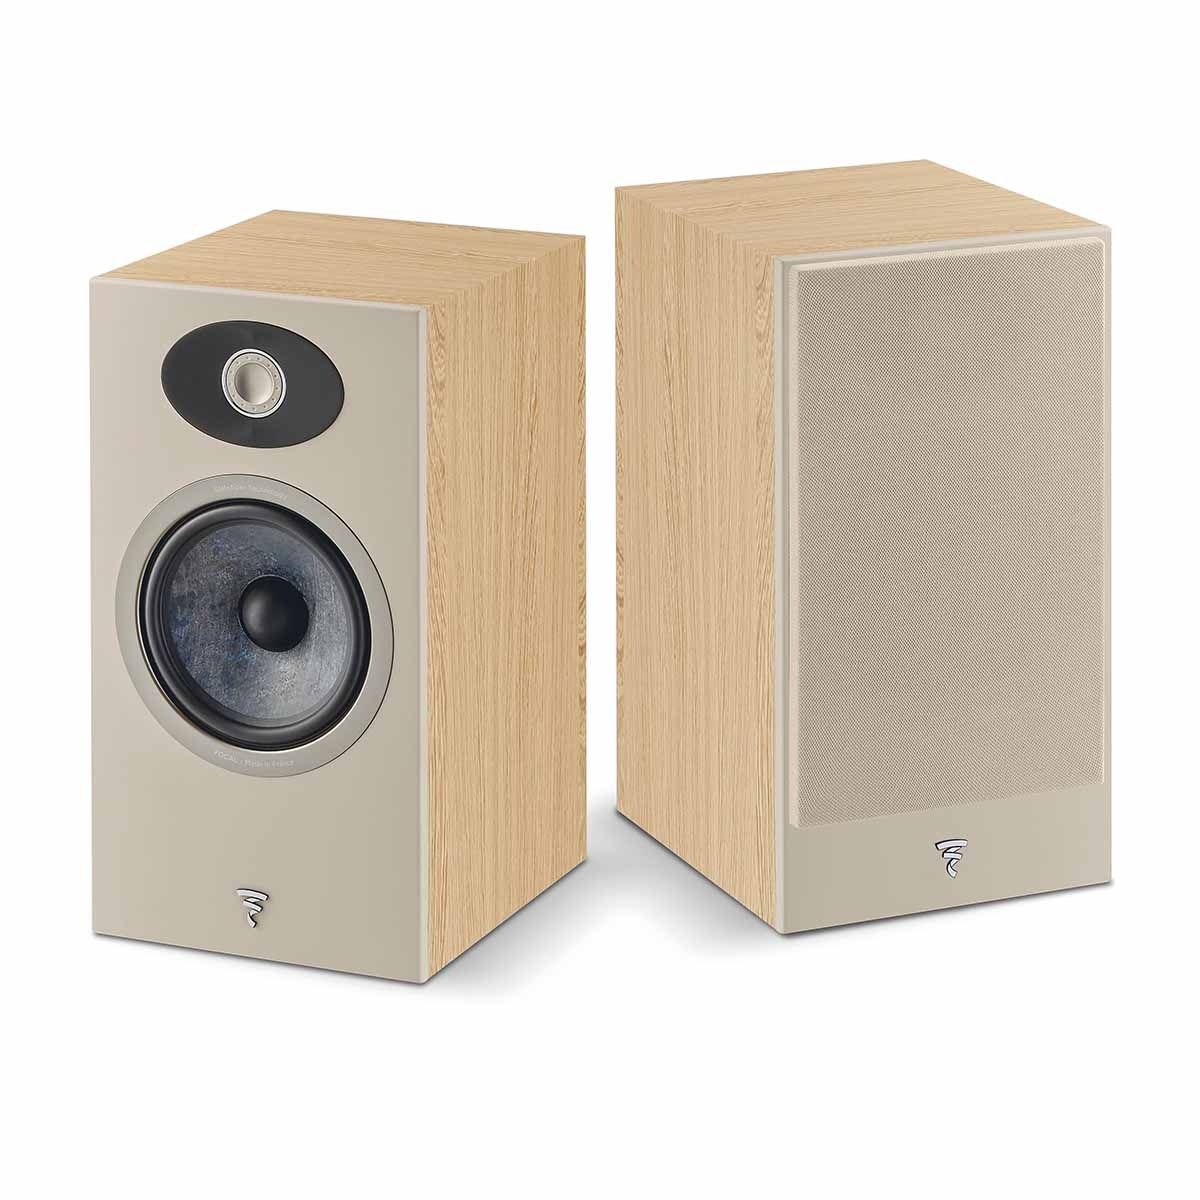 Focal Theva No1 Bookshelf Speakers - Pair - view of light wood pair, one with grille, one without grille